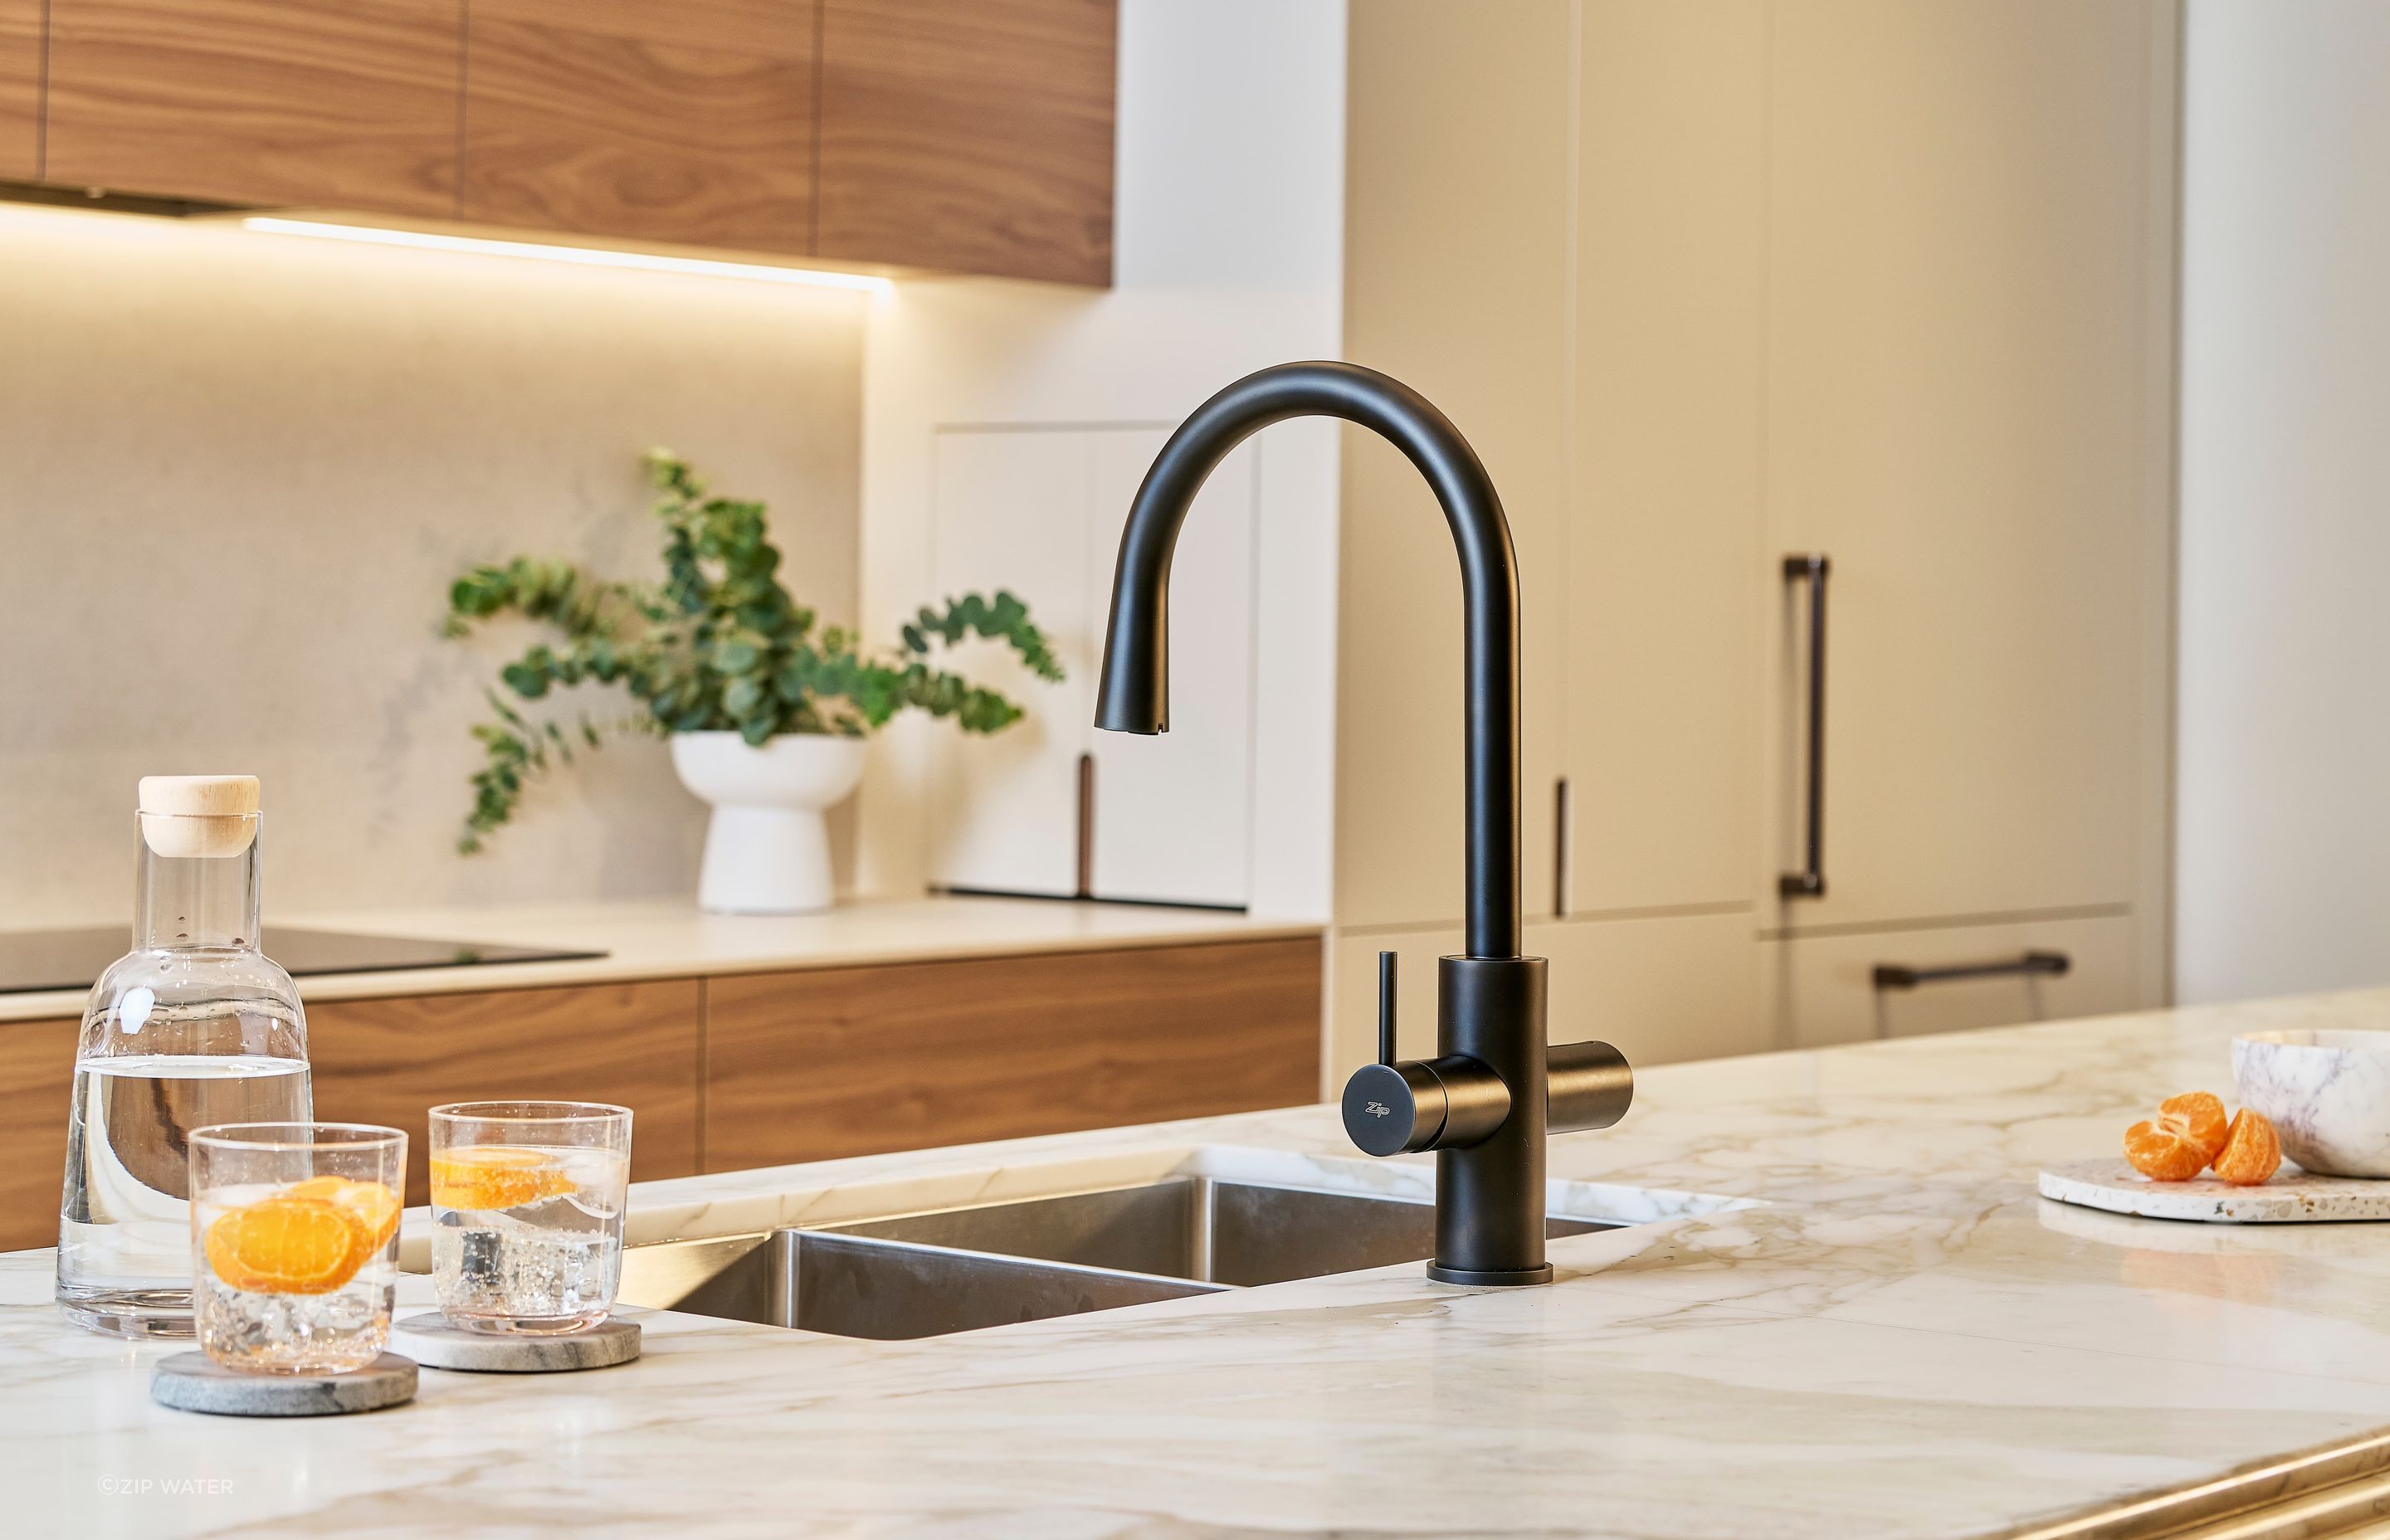 The Zip HydroTap Celsius Plus All-In-One is one of the latest product to join the Zip family, offering instant filtered boiling, chilled, and sparkling water to suit all kitchen needs.